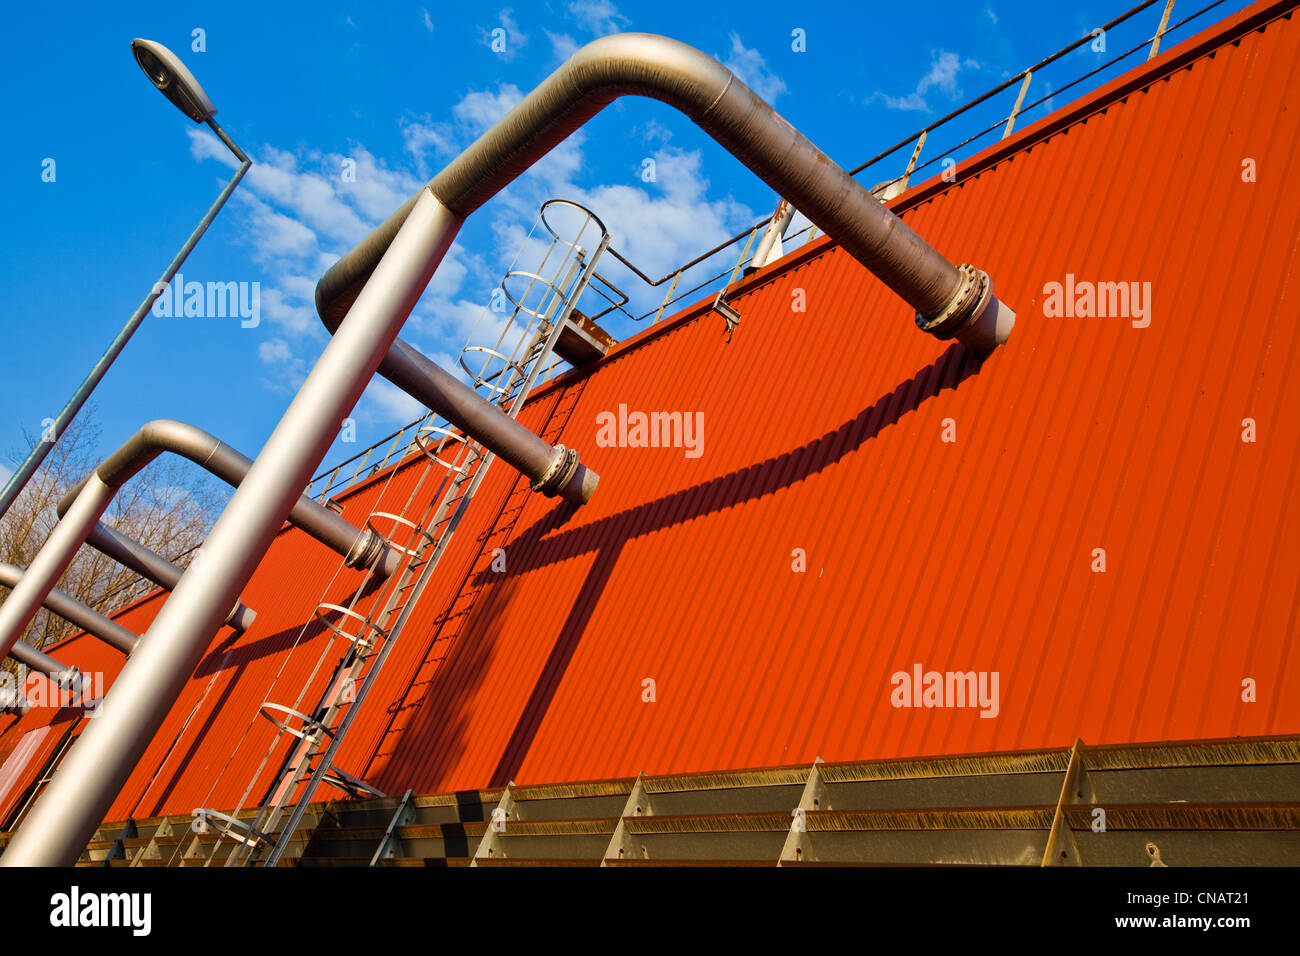 Abstract image of cooling water plumbing at a particle physics research laboratory Stock Photo